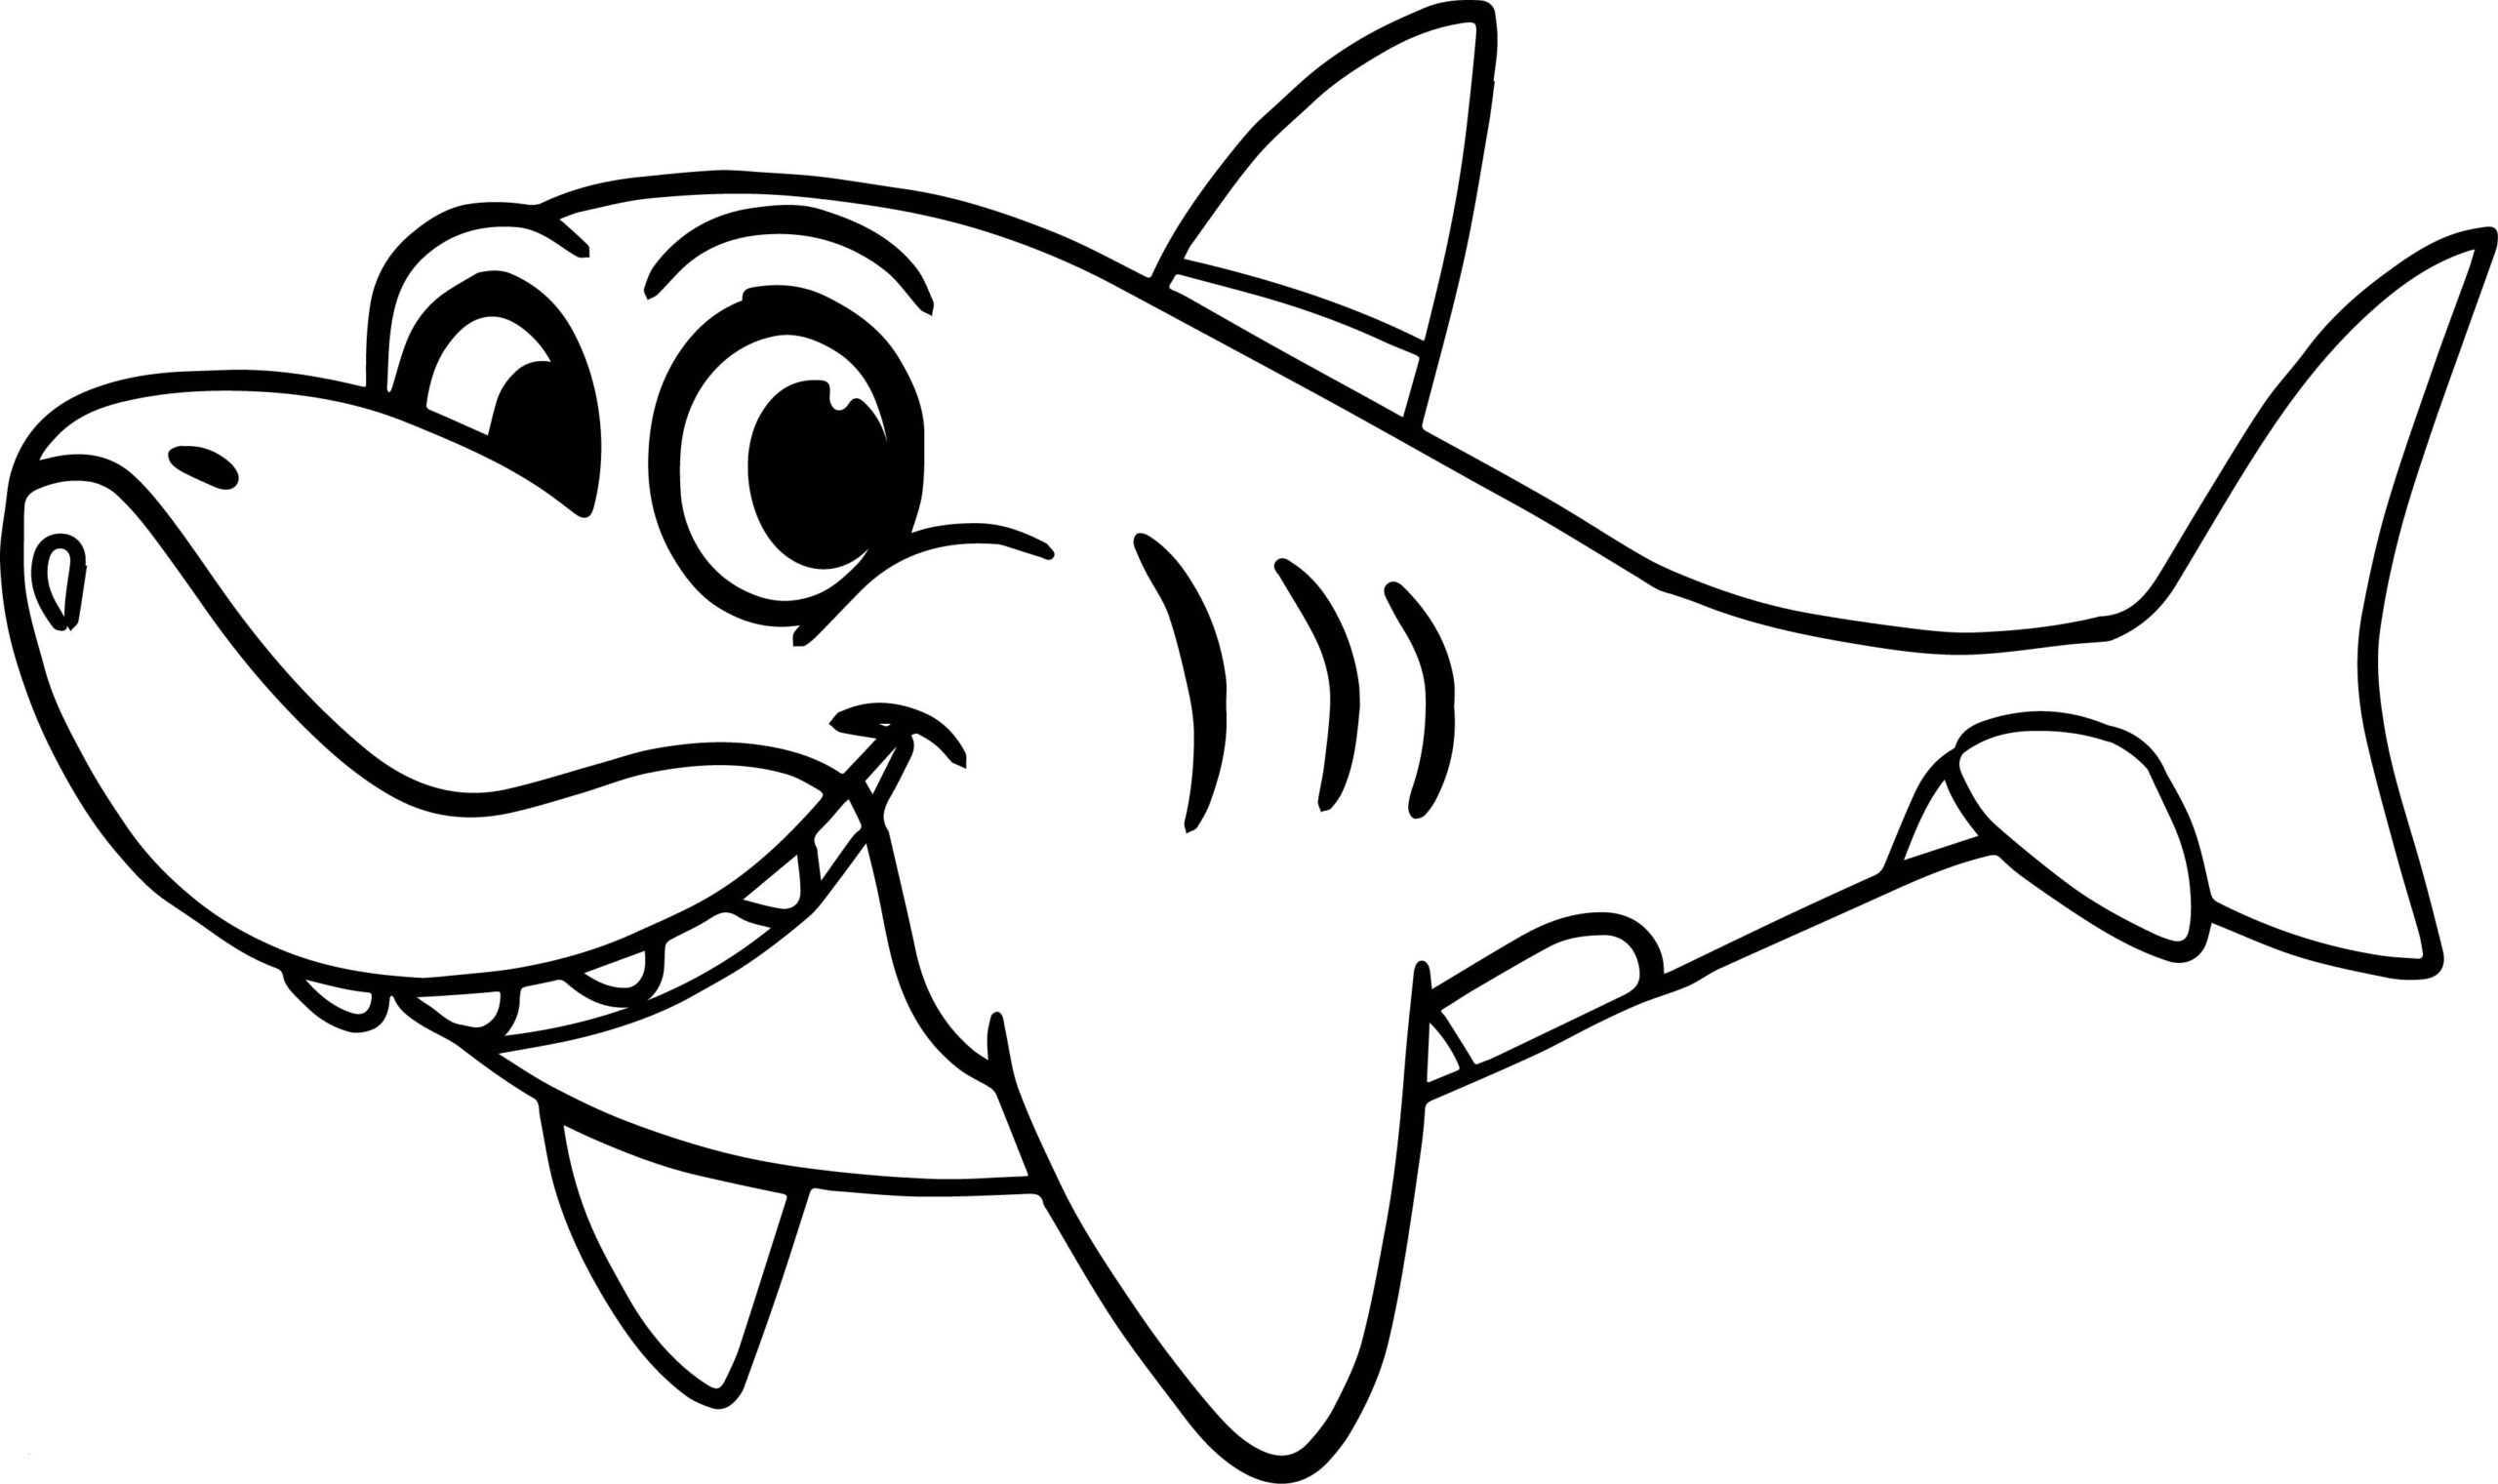 baby shark coloring pages free printable new coloring book world excelent free shark coloring pages image